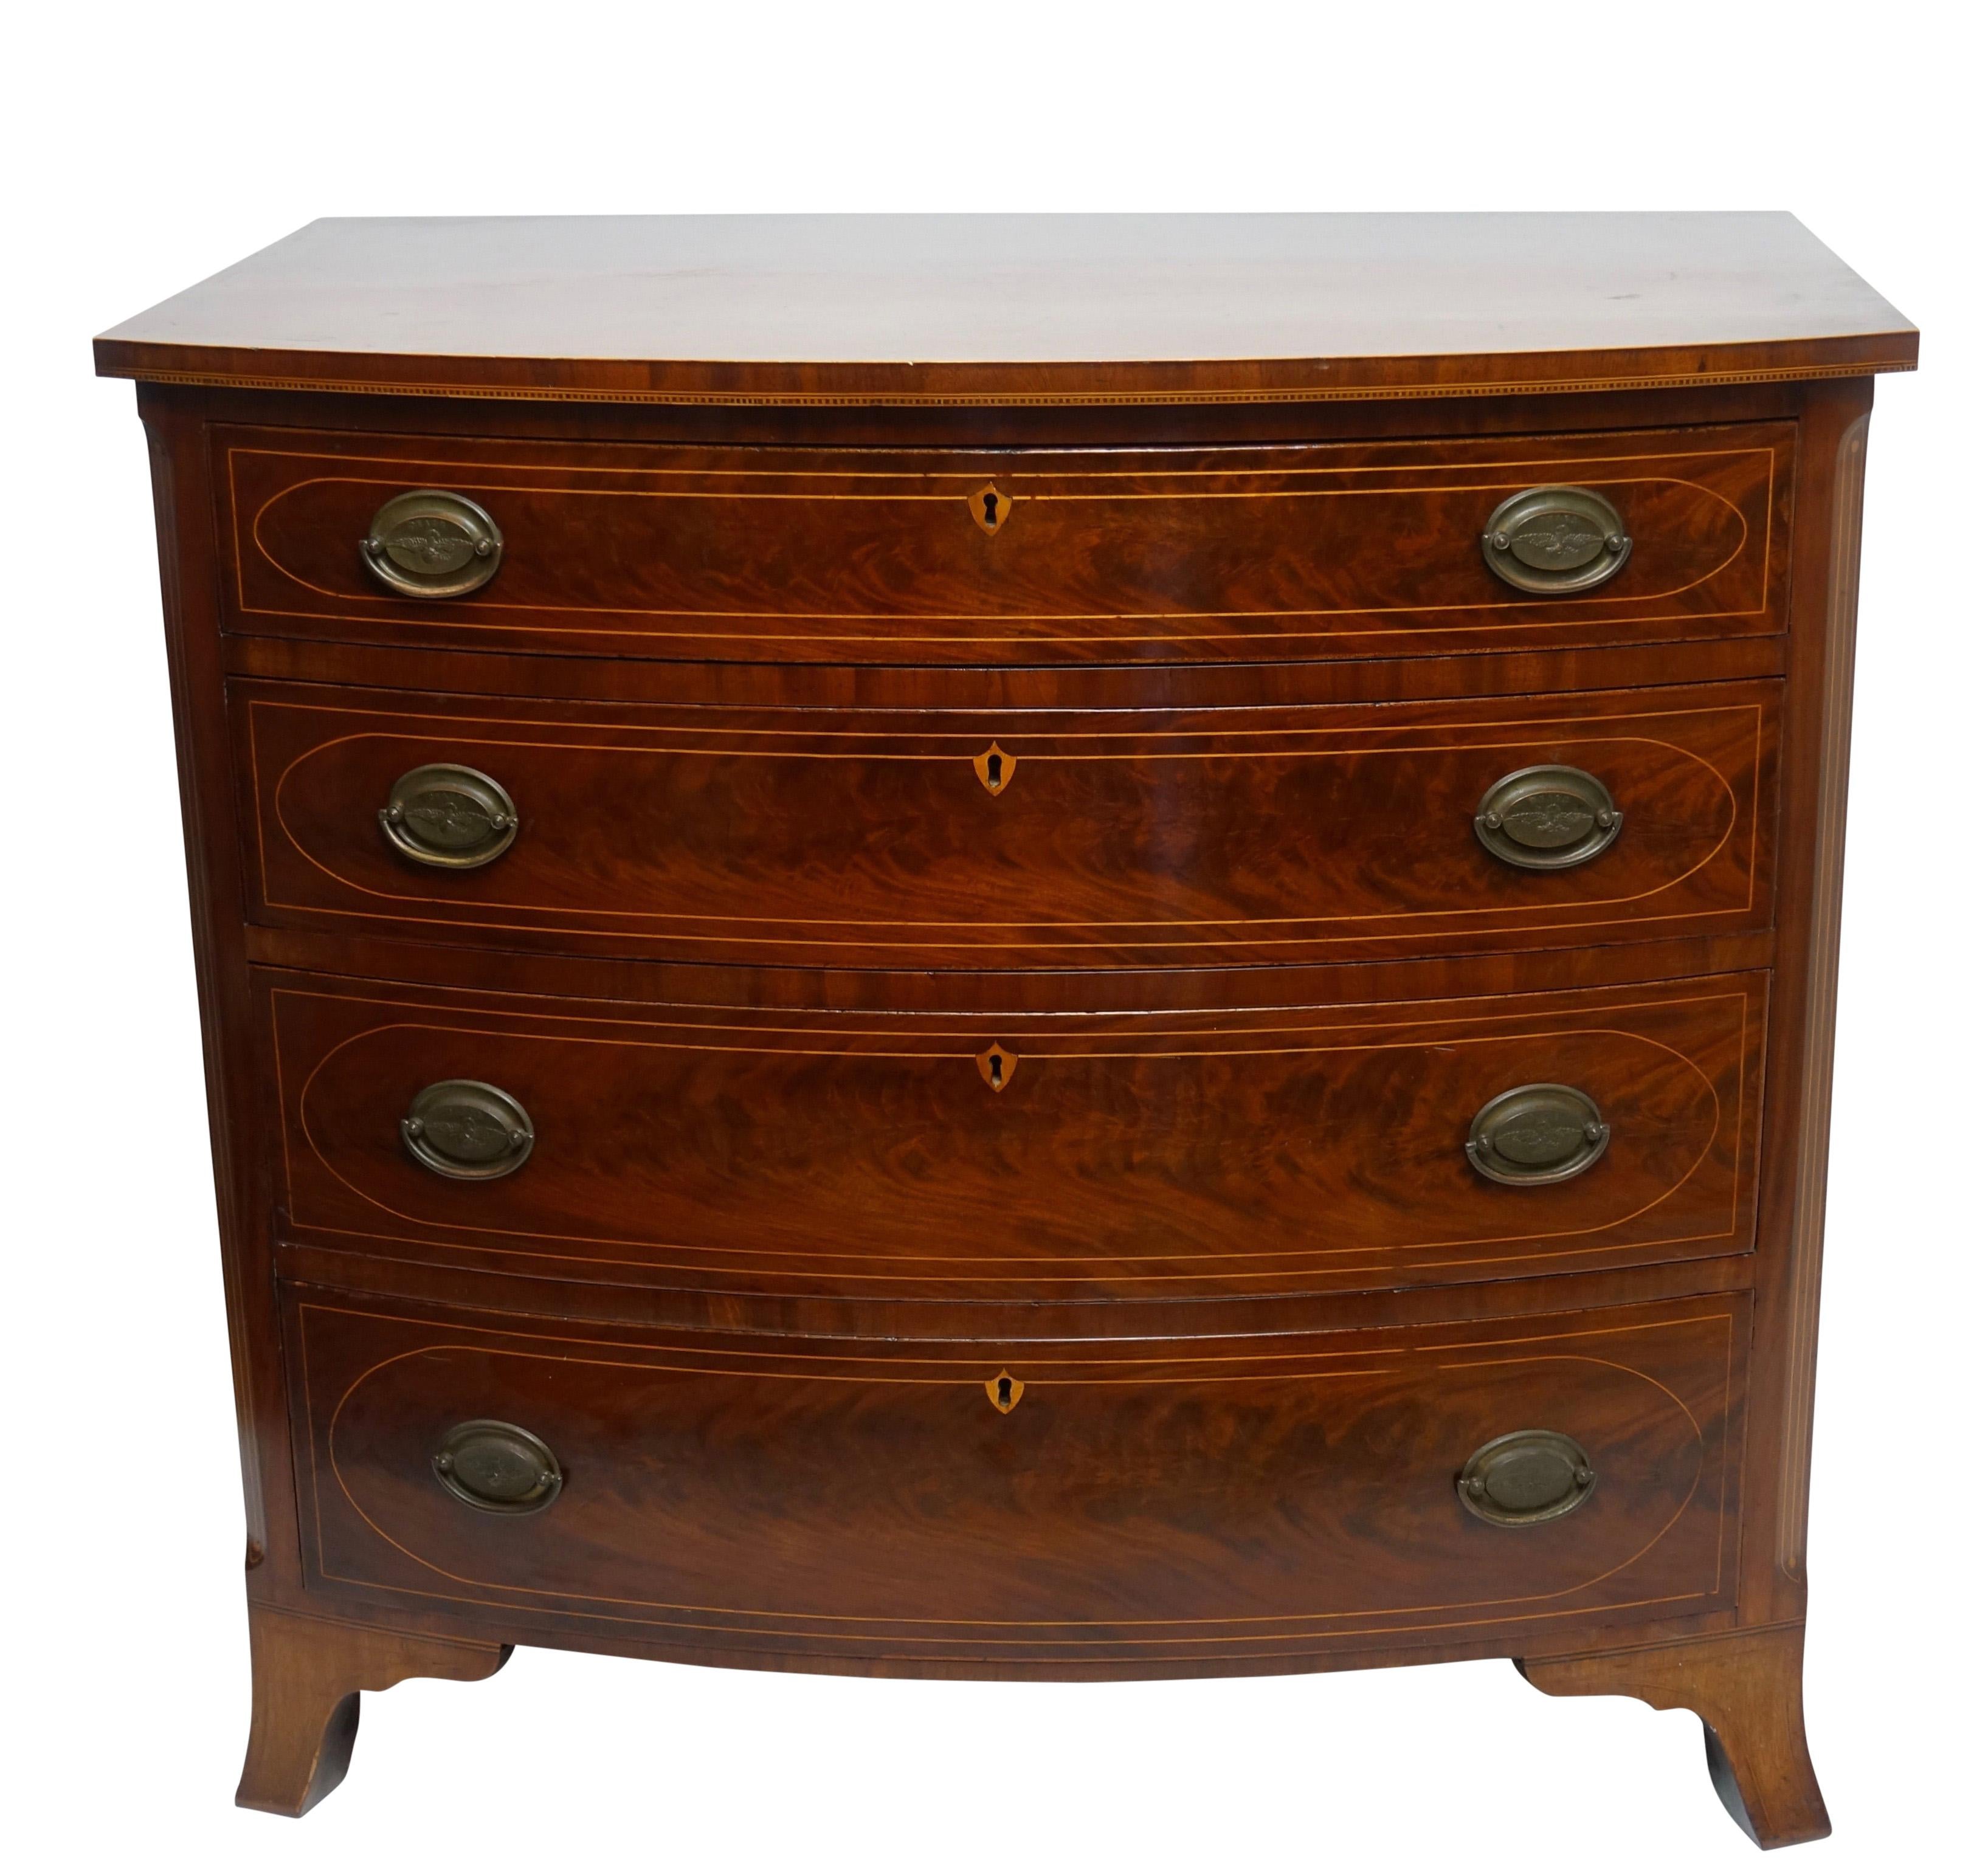 Inlay American Federal Mahogany Bow Front Chest of Drawers, 19th Century, circa 1820